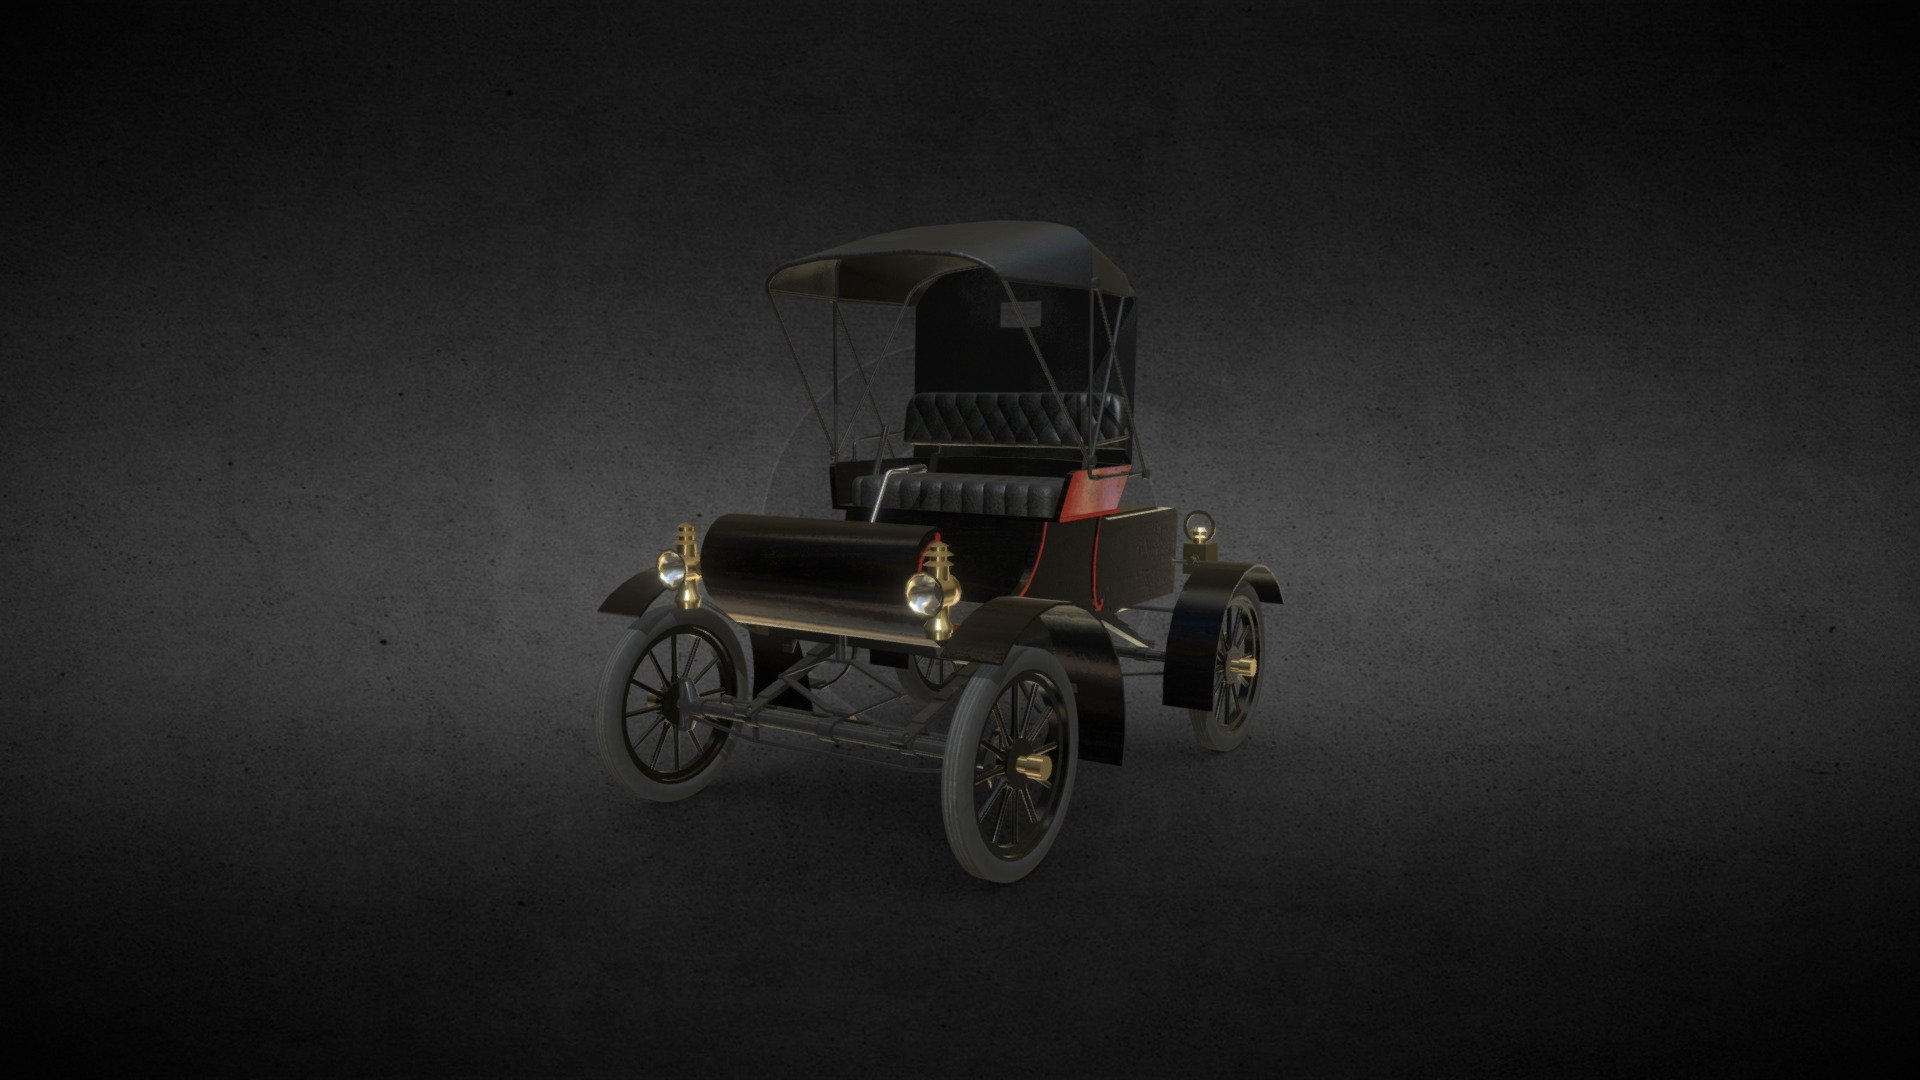 A simplified 3D model of a classic car - Oldsmobile Curved Dash from 1901.

Modeled in Blender 2.92, textured in Quixel Mixer

I hope you'd like it :) - (Mid-poly) Oldsmobile Curved Dash (1901) - 3D model by KrStolorz 3d model